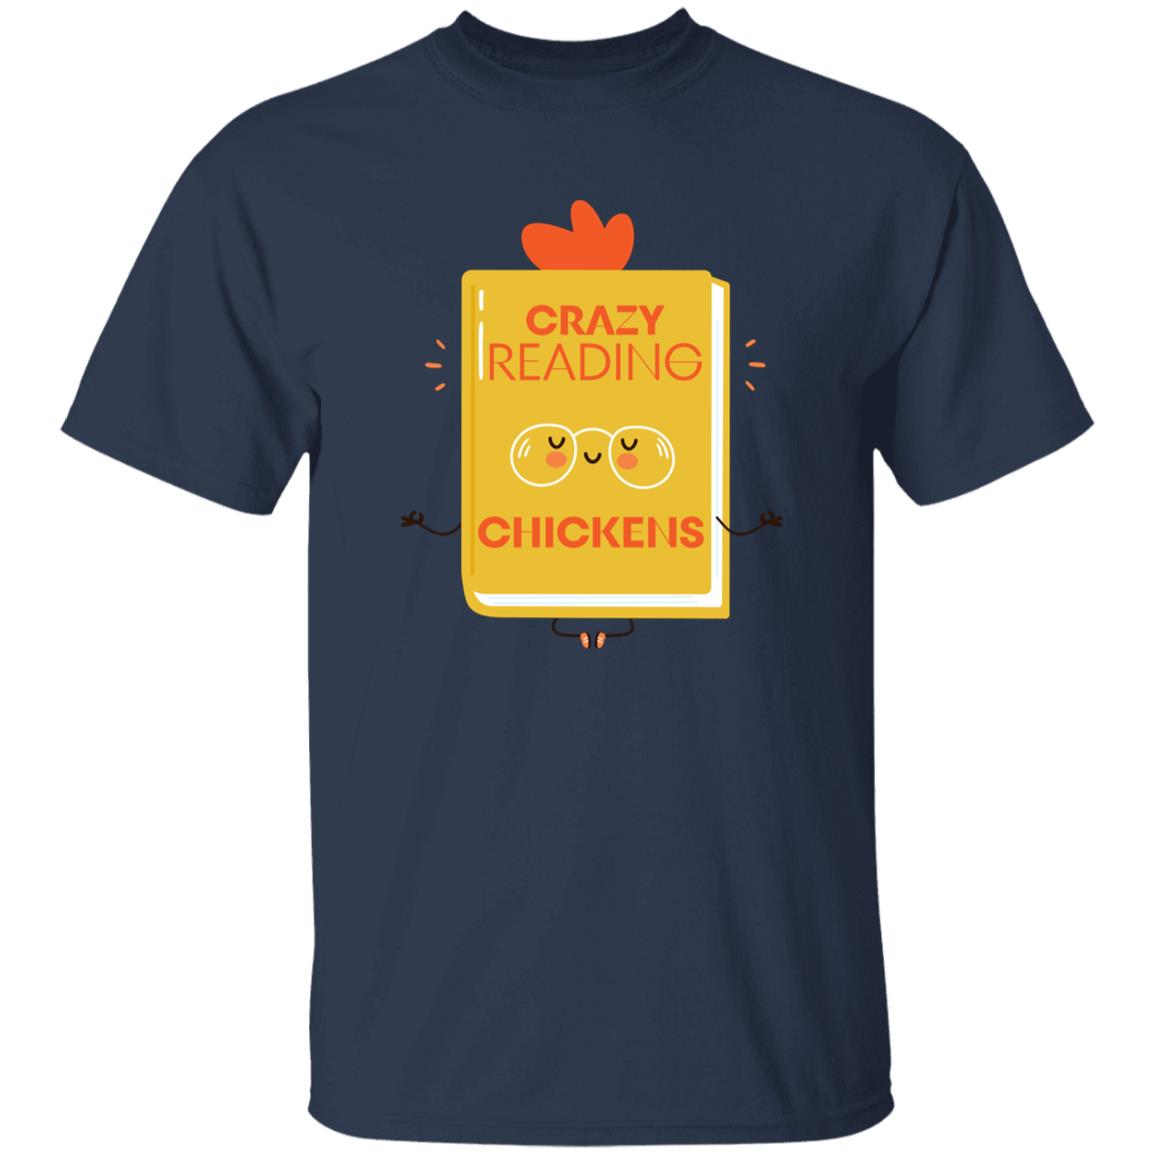 Crazy Reading Chickens T-Shirt